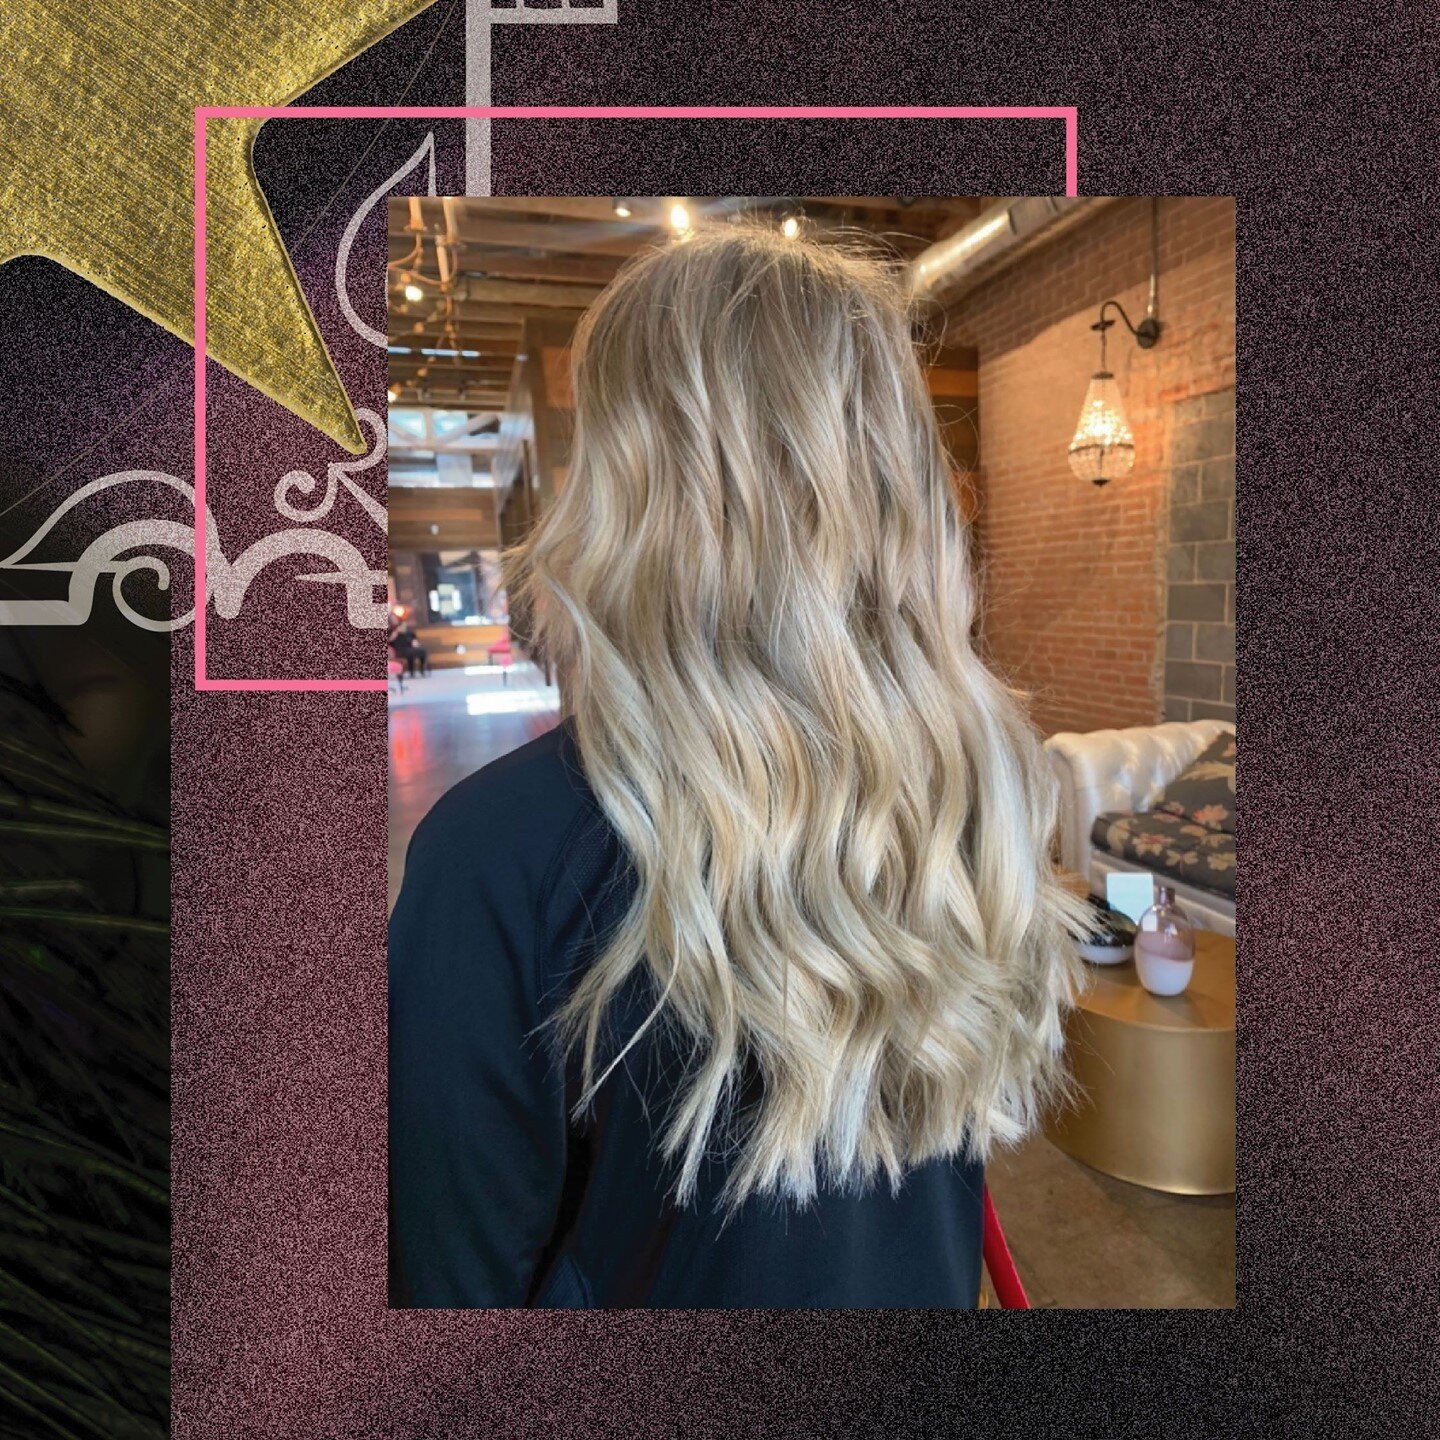 🌤️ soft blonde dimension 🌤️ ⠀
⠀
Get the look. Give Jaiden a today - 575-640-3730